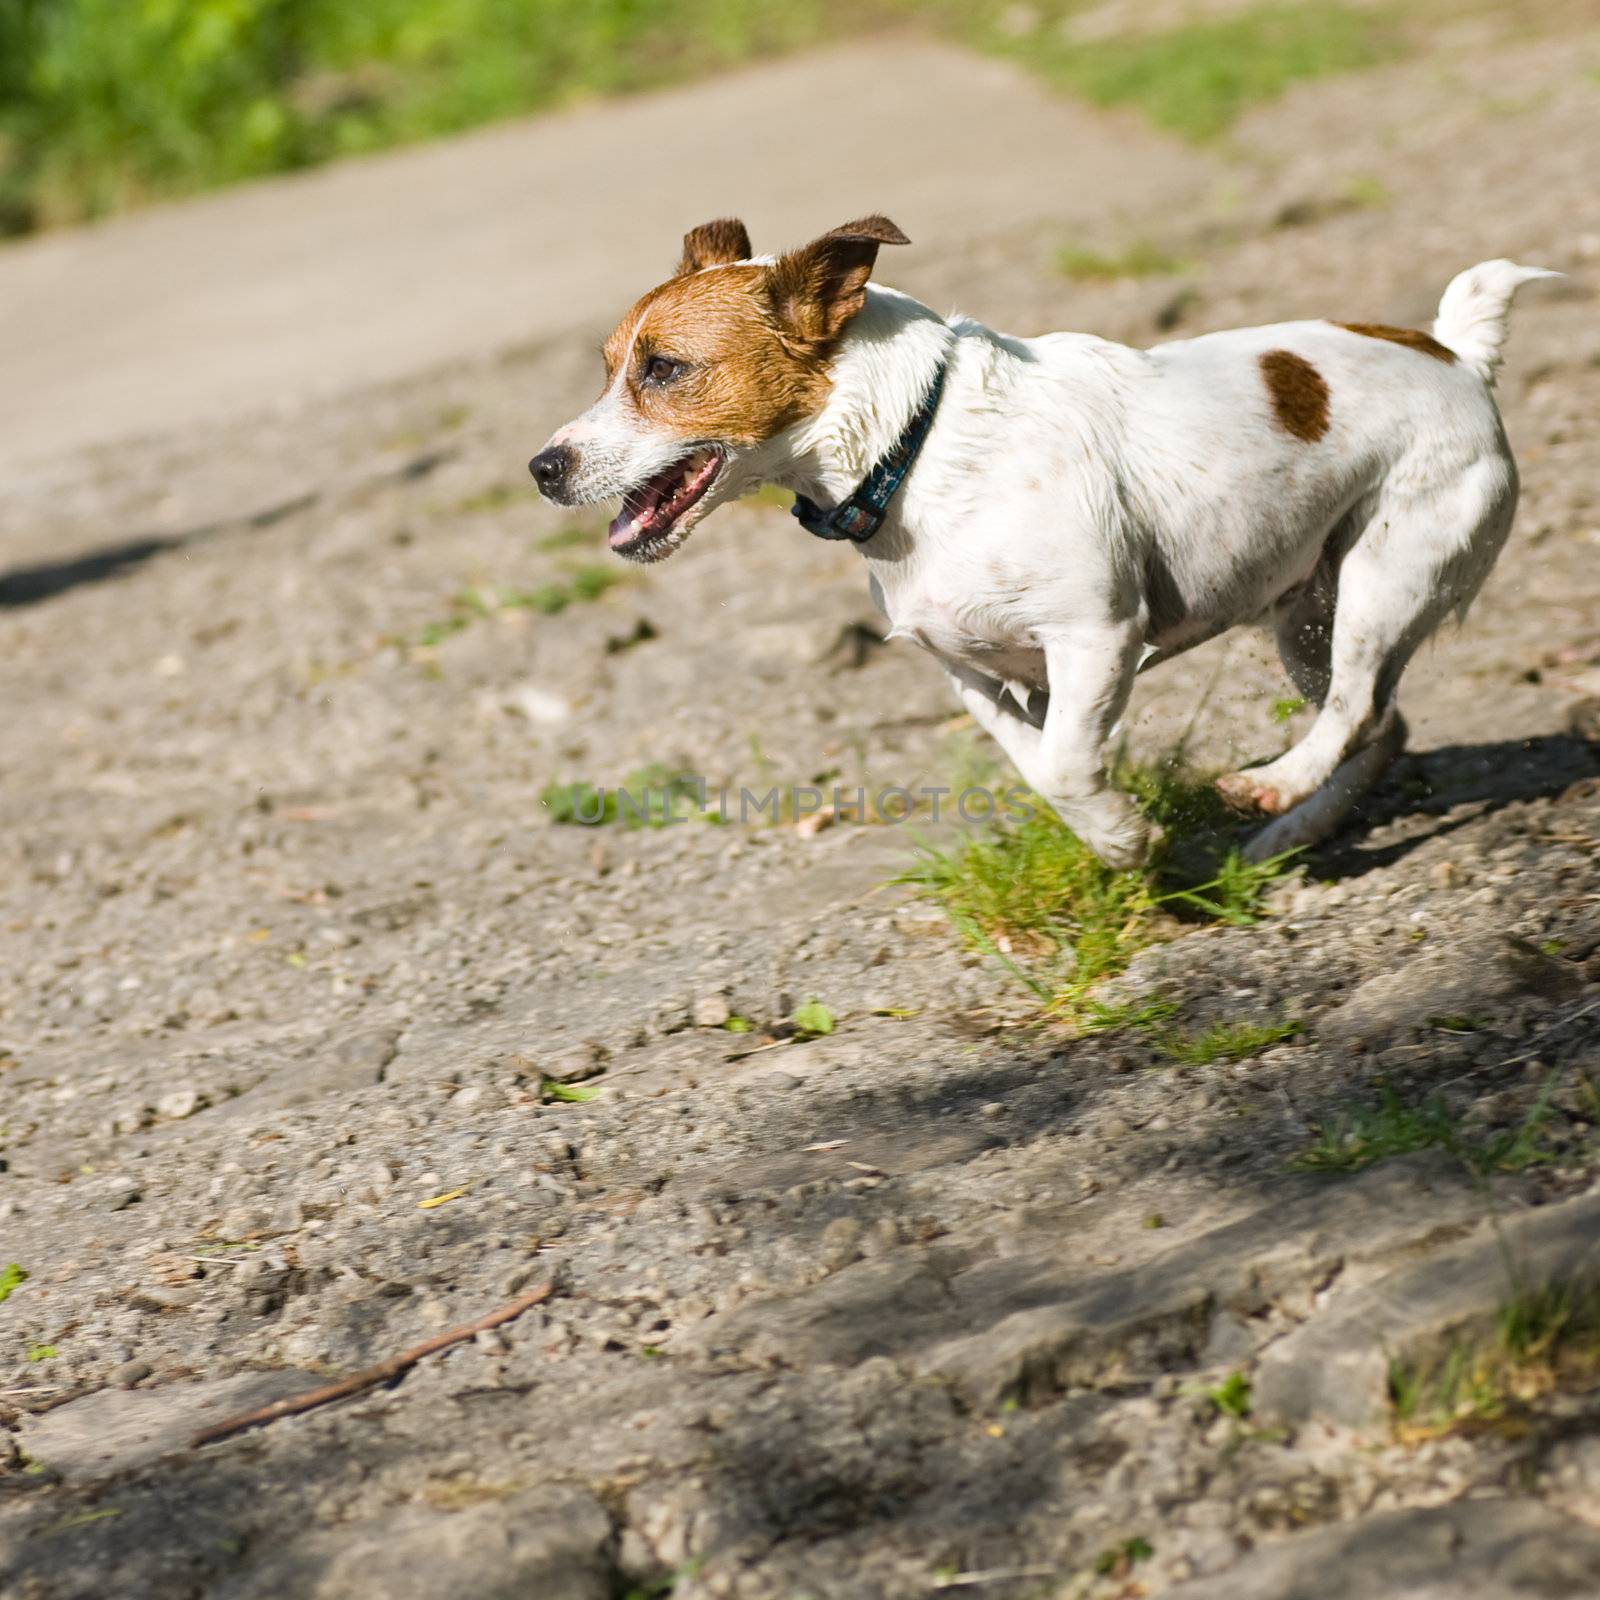 A Jack russel terrier in mid stride.